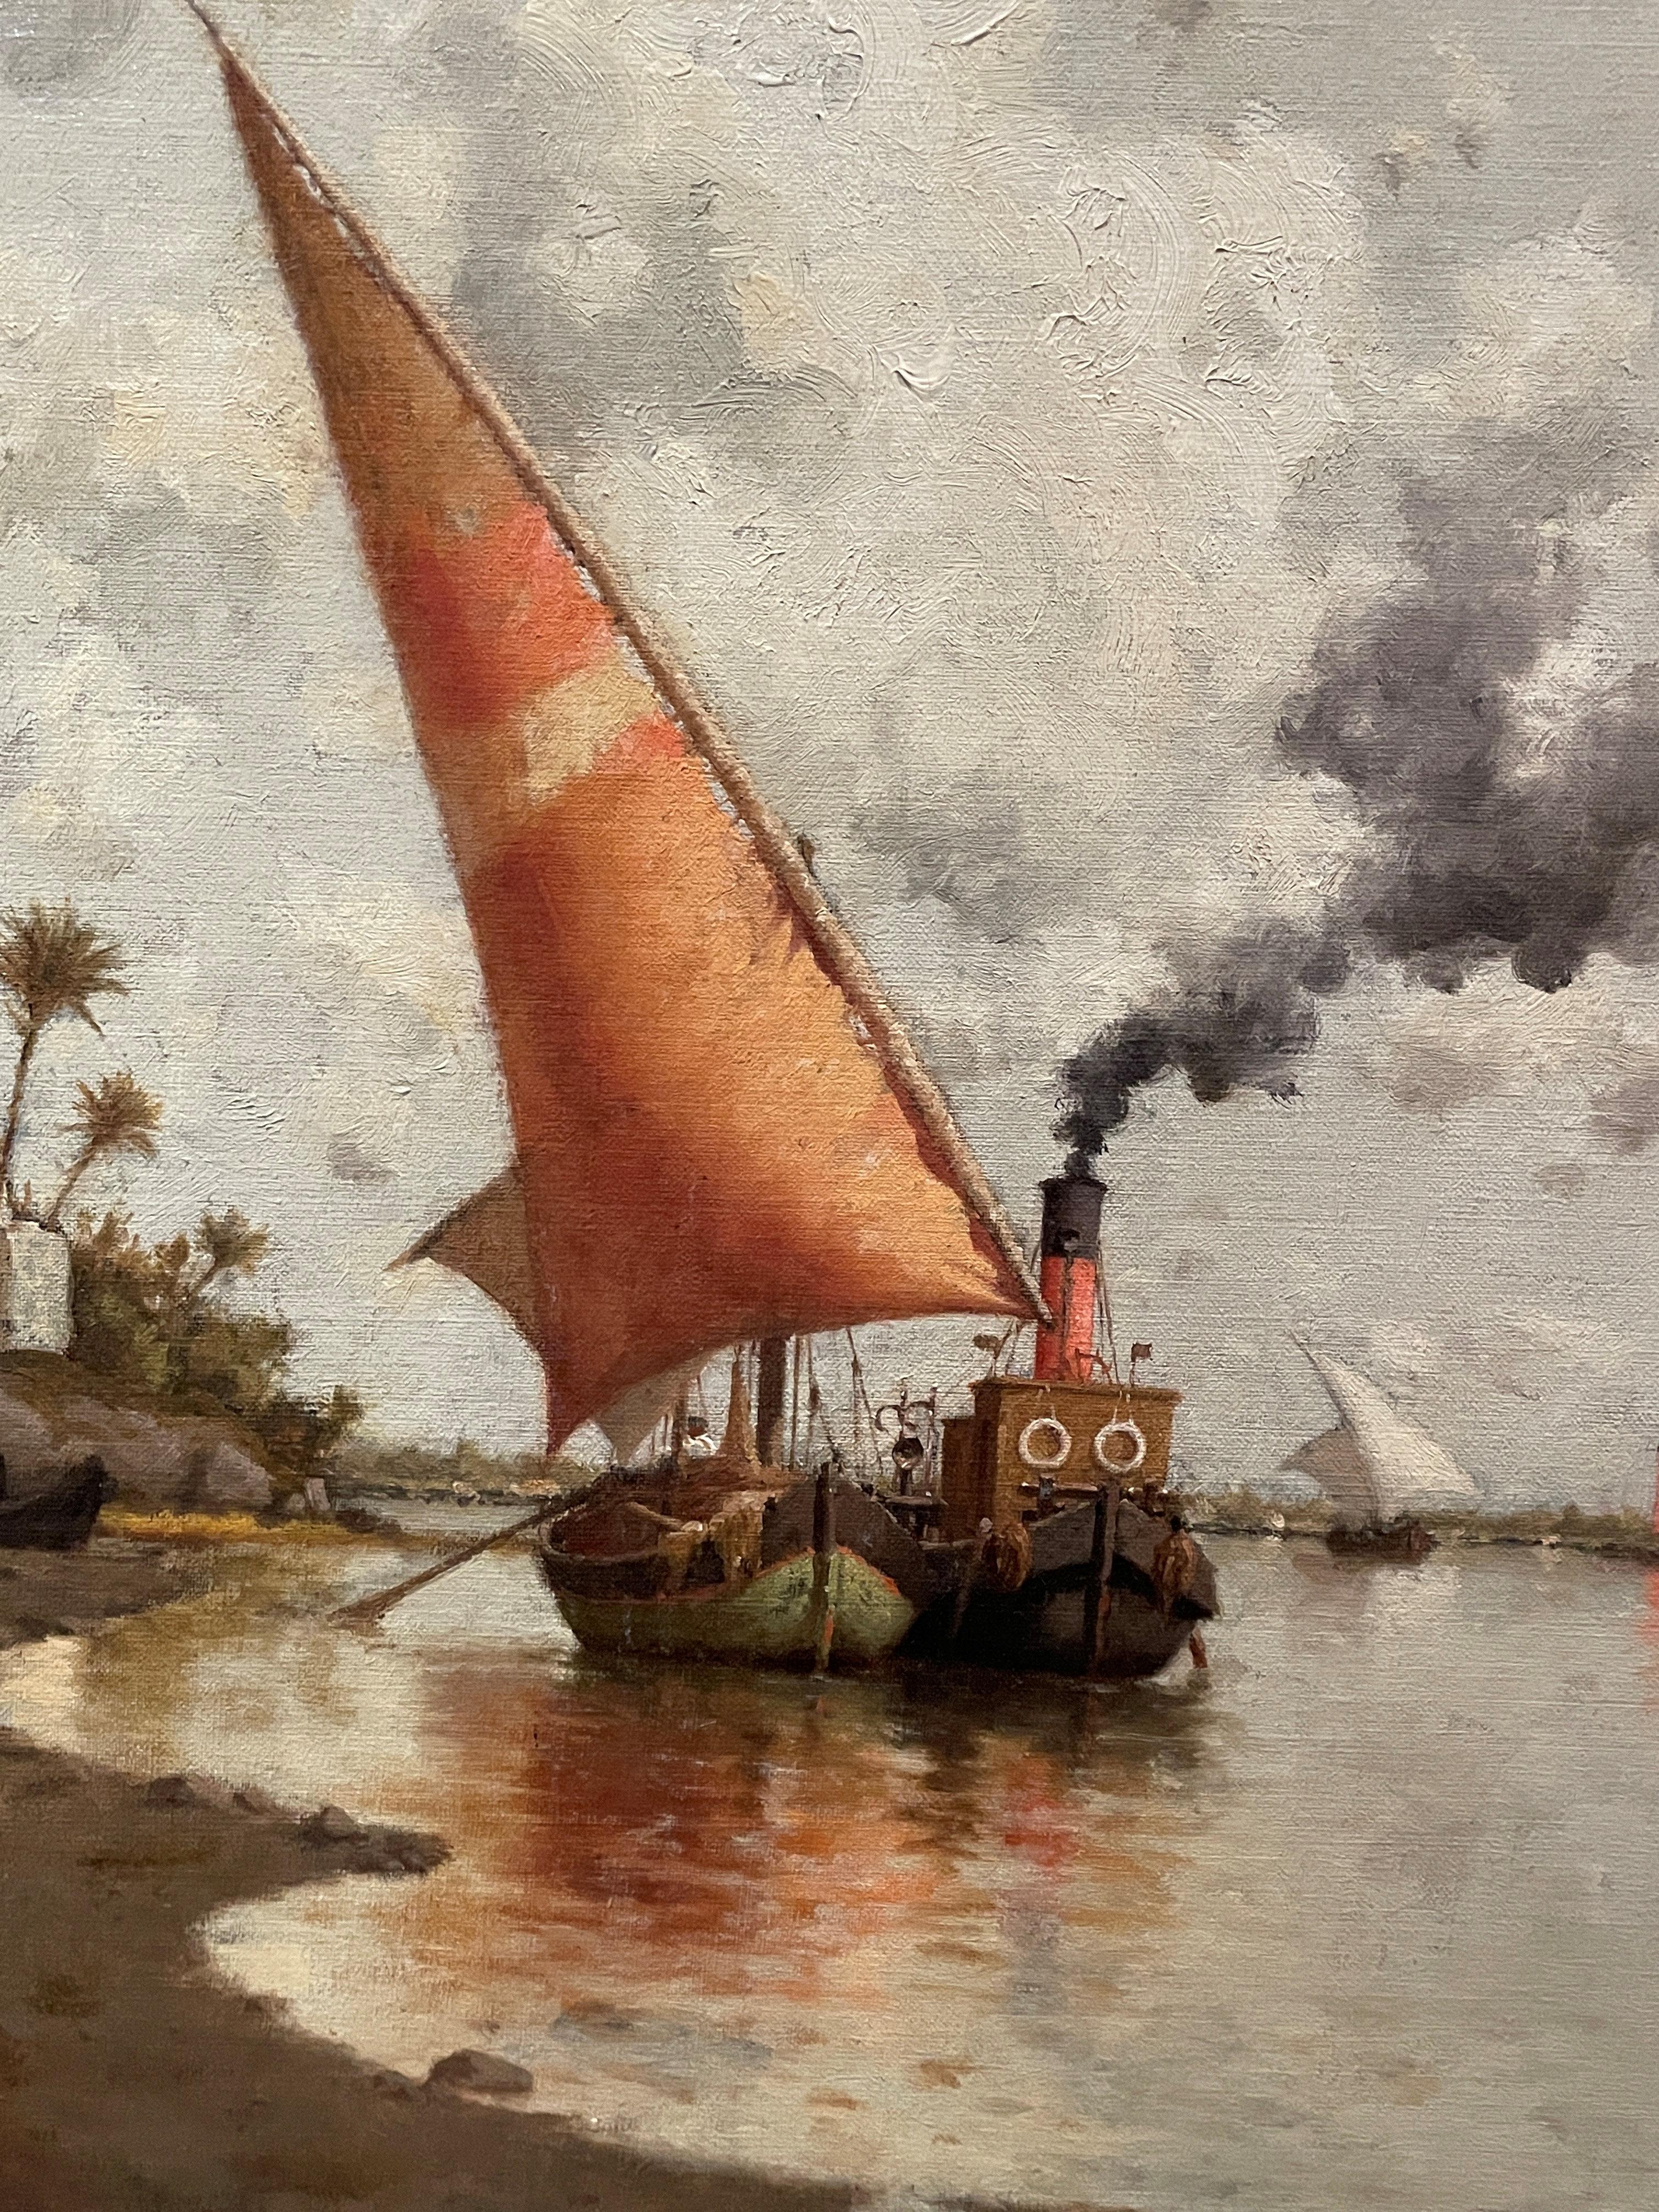 Walter Blackman (1847 - 1928)
Near Alexandria, On the Nile River, Egypt
Oil on canvas
28 x 22 inches
Signed lower left; titled on the stretcher

Walter Blackman was born in New York in 1847 and died December 13, 1928 in Chicago, Illinois. He